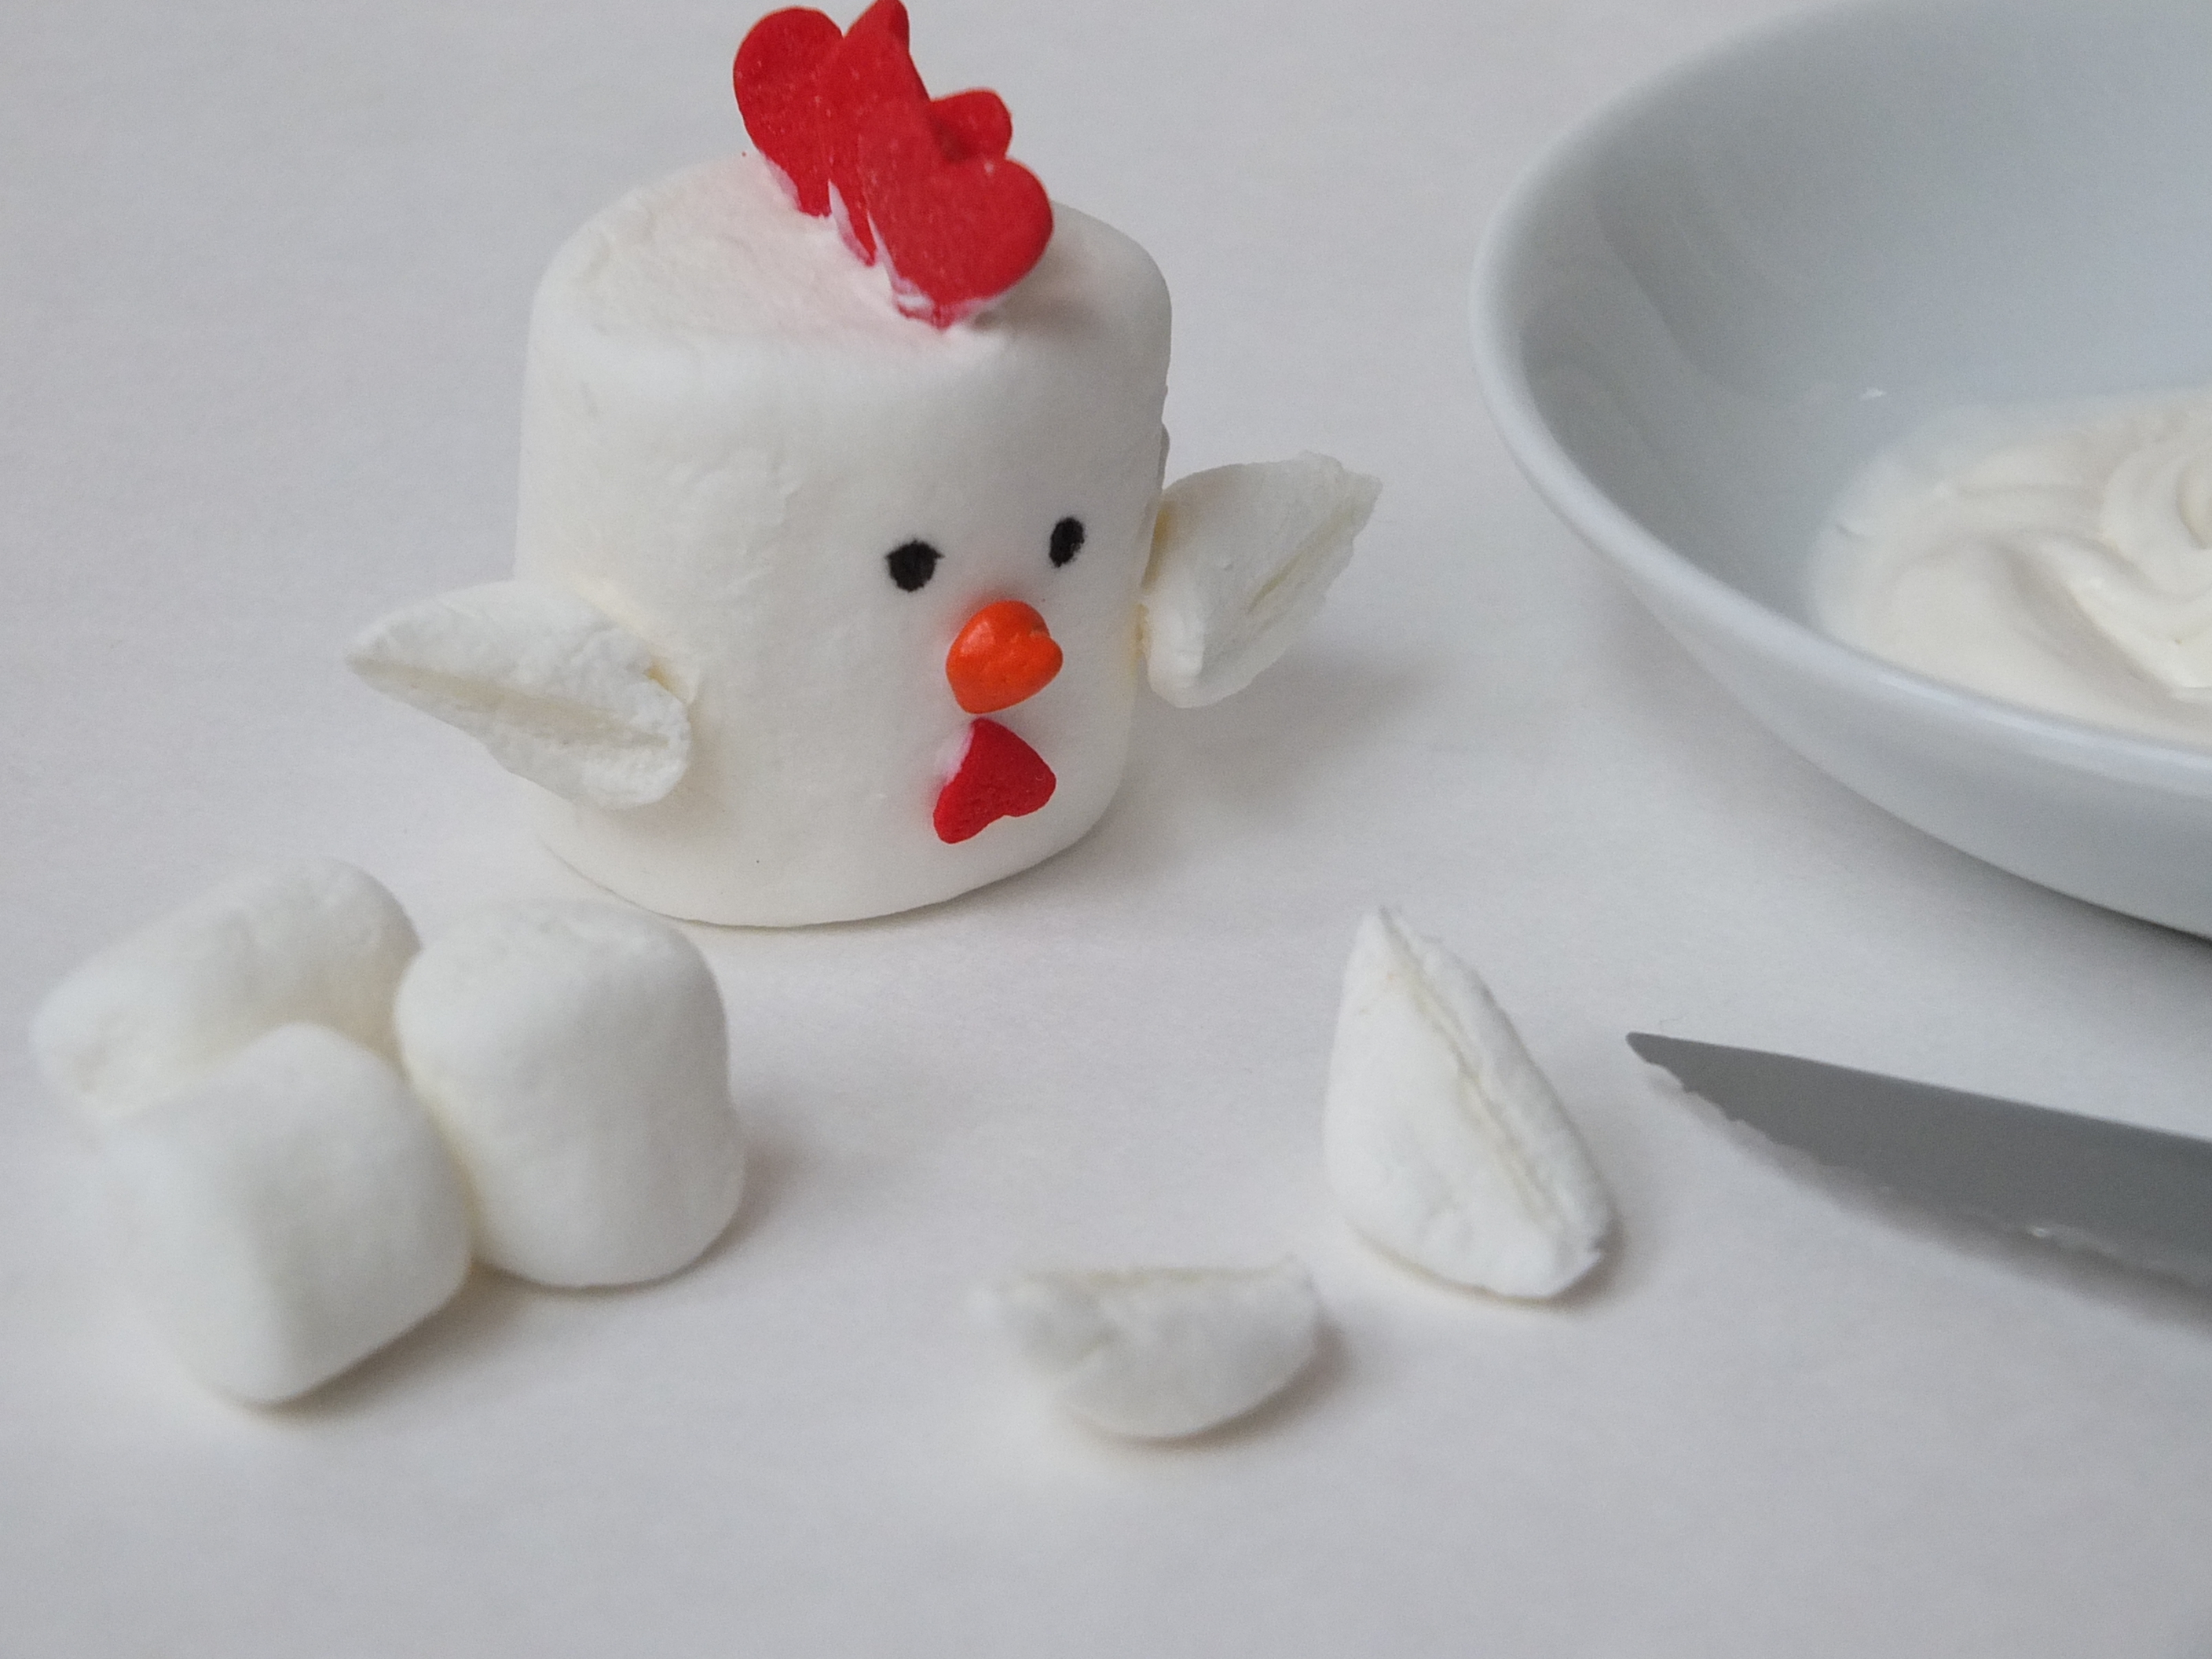 Chinese Lunar New Year Rooster Marshmallows easy dessert ideas kids2816 x 2112